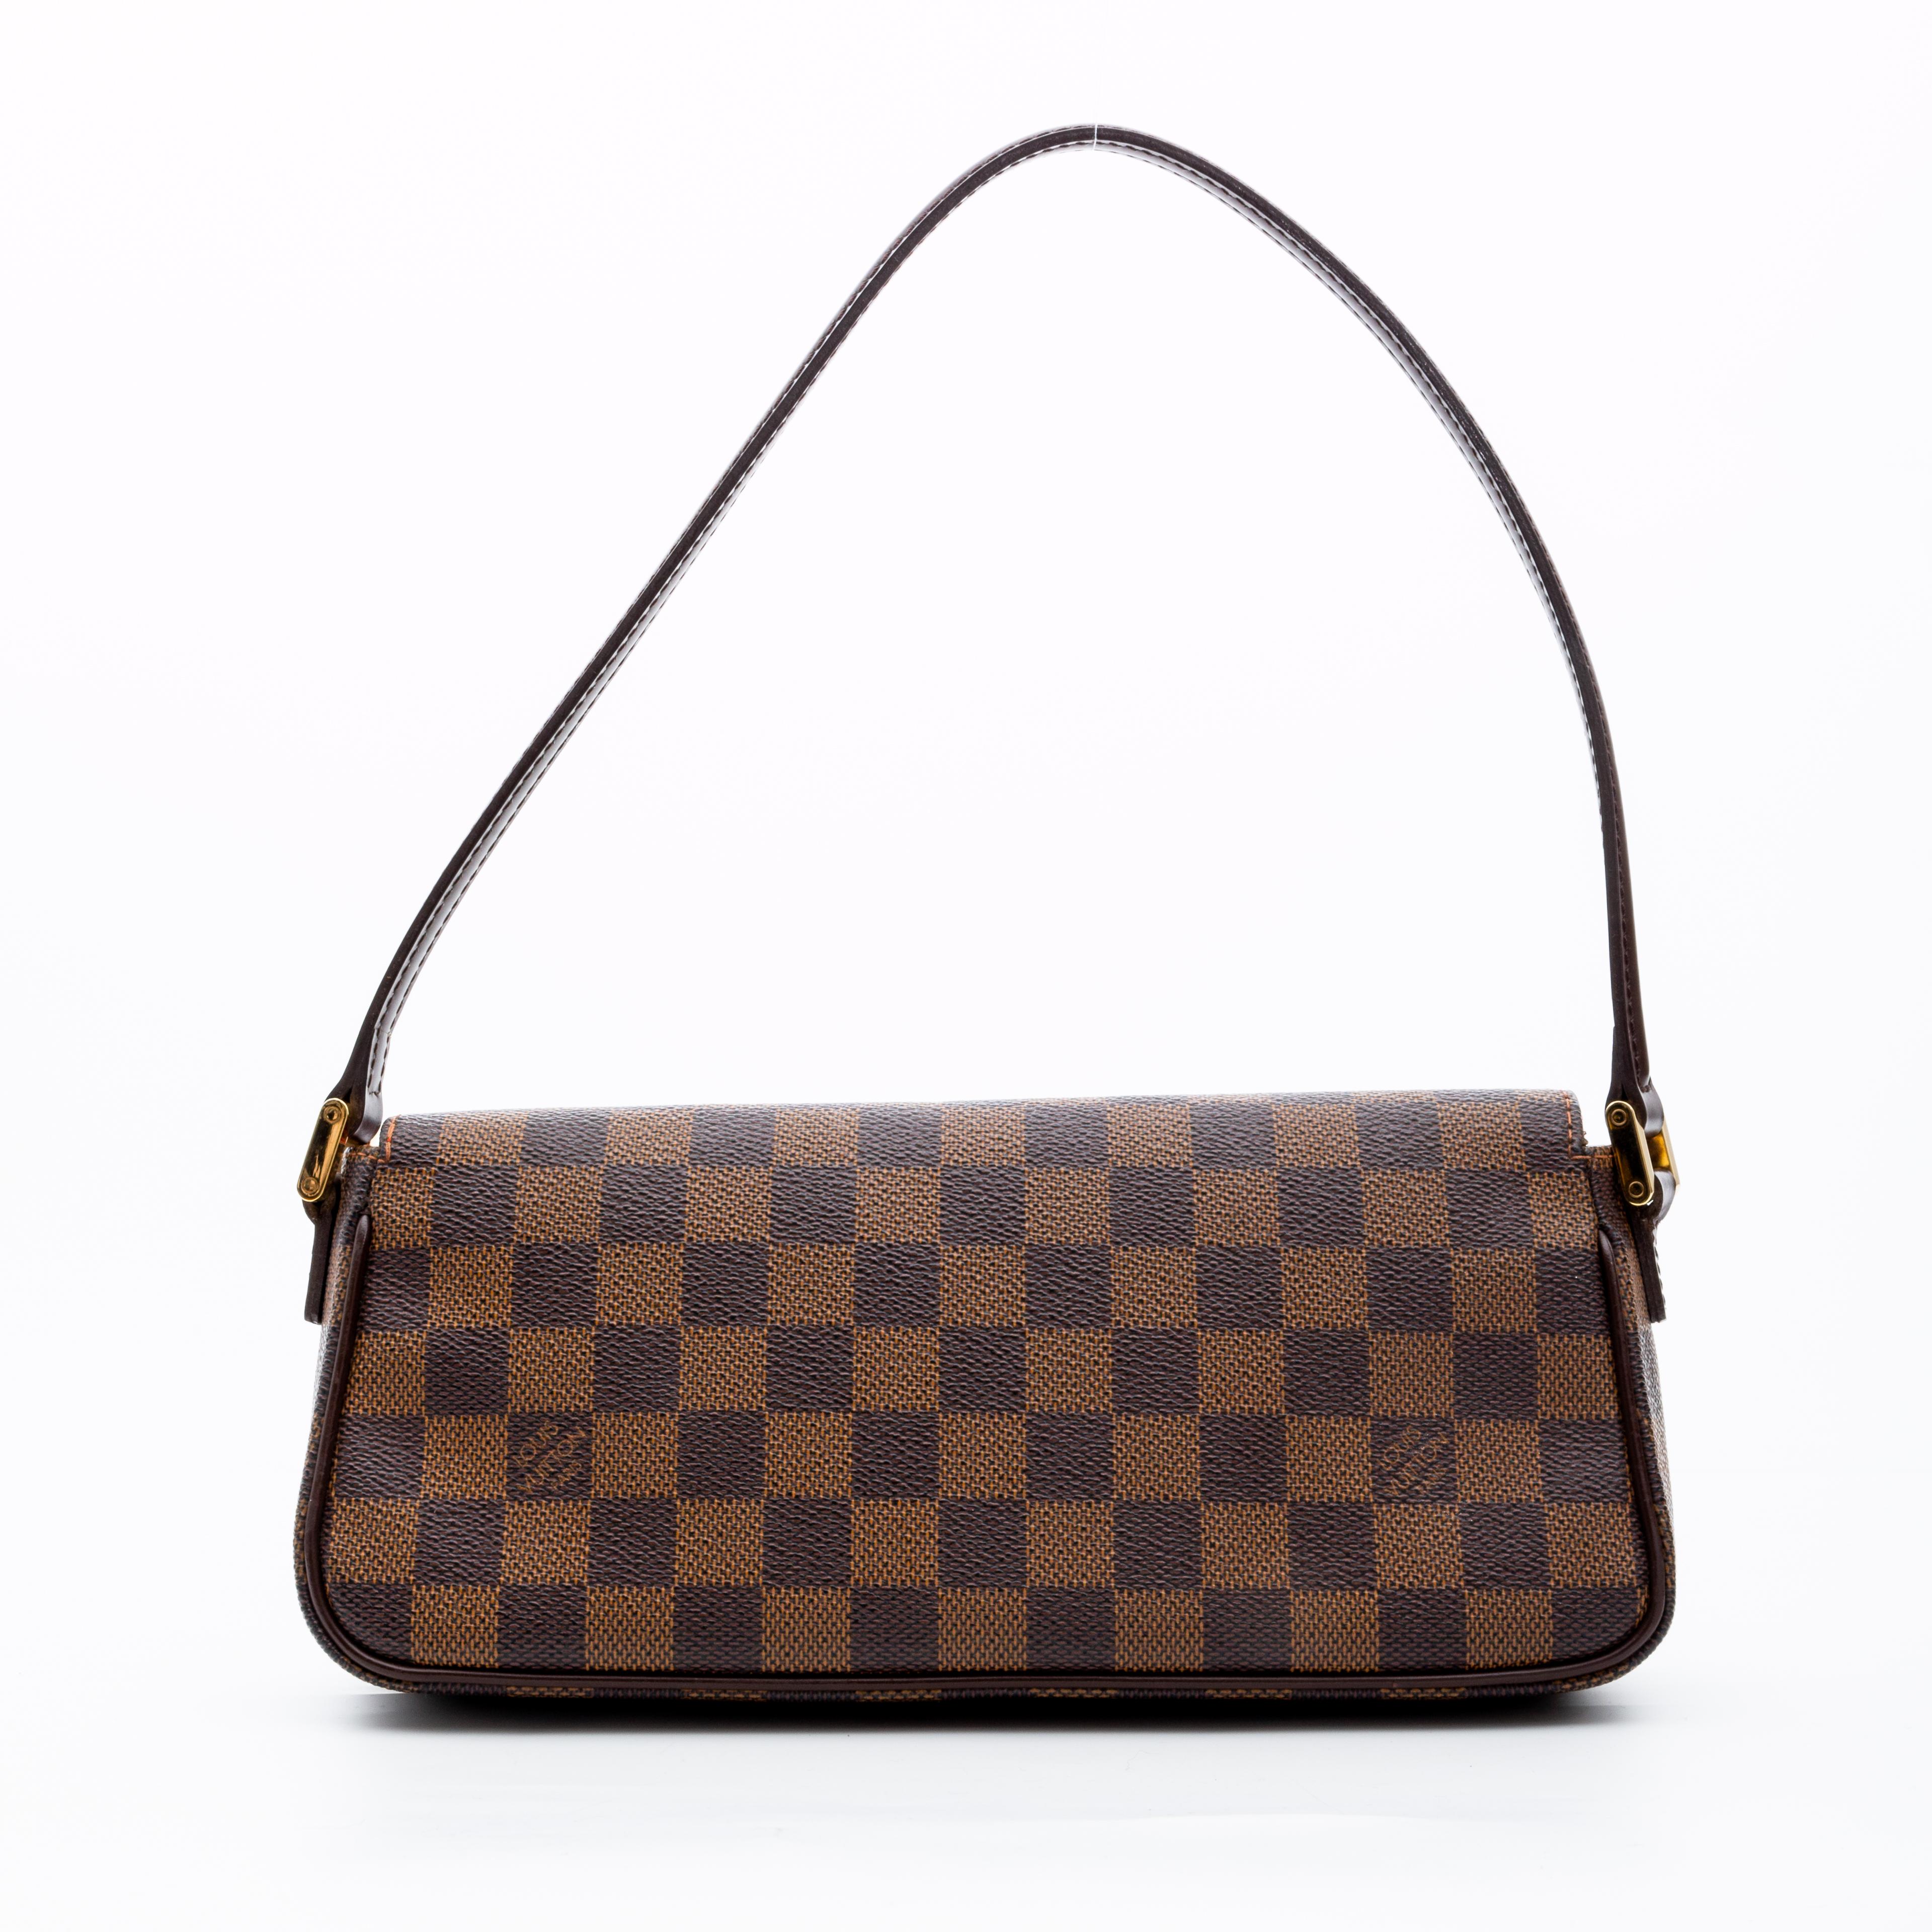 This bag is made with brown Damier ebene coated canvas. The bag features brown leather trim, a flat leather shoulder strap, gold tone hardware, a front flap with snap closure and an interior with red alcantara lining with a patch pocket. (Damier